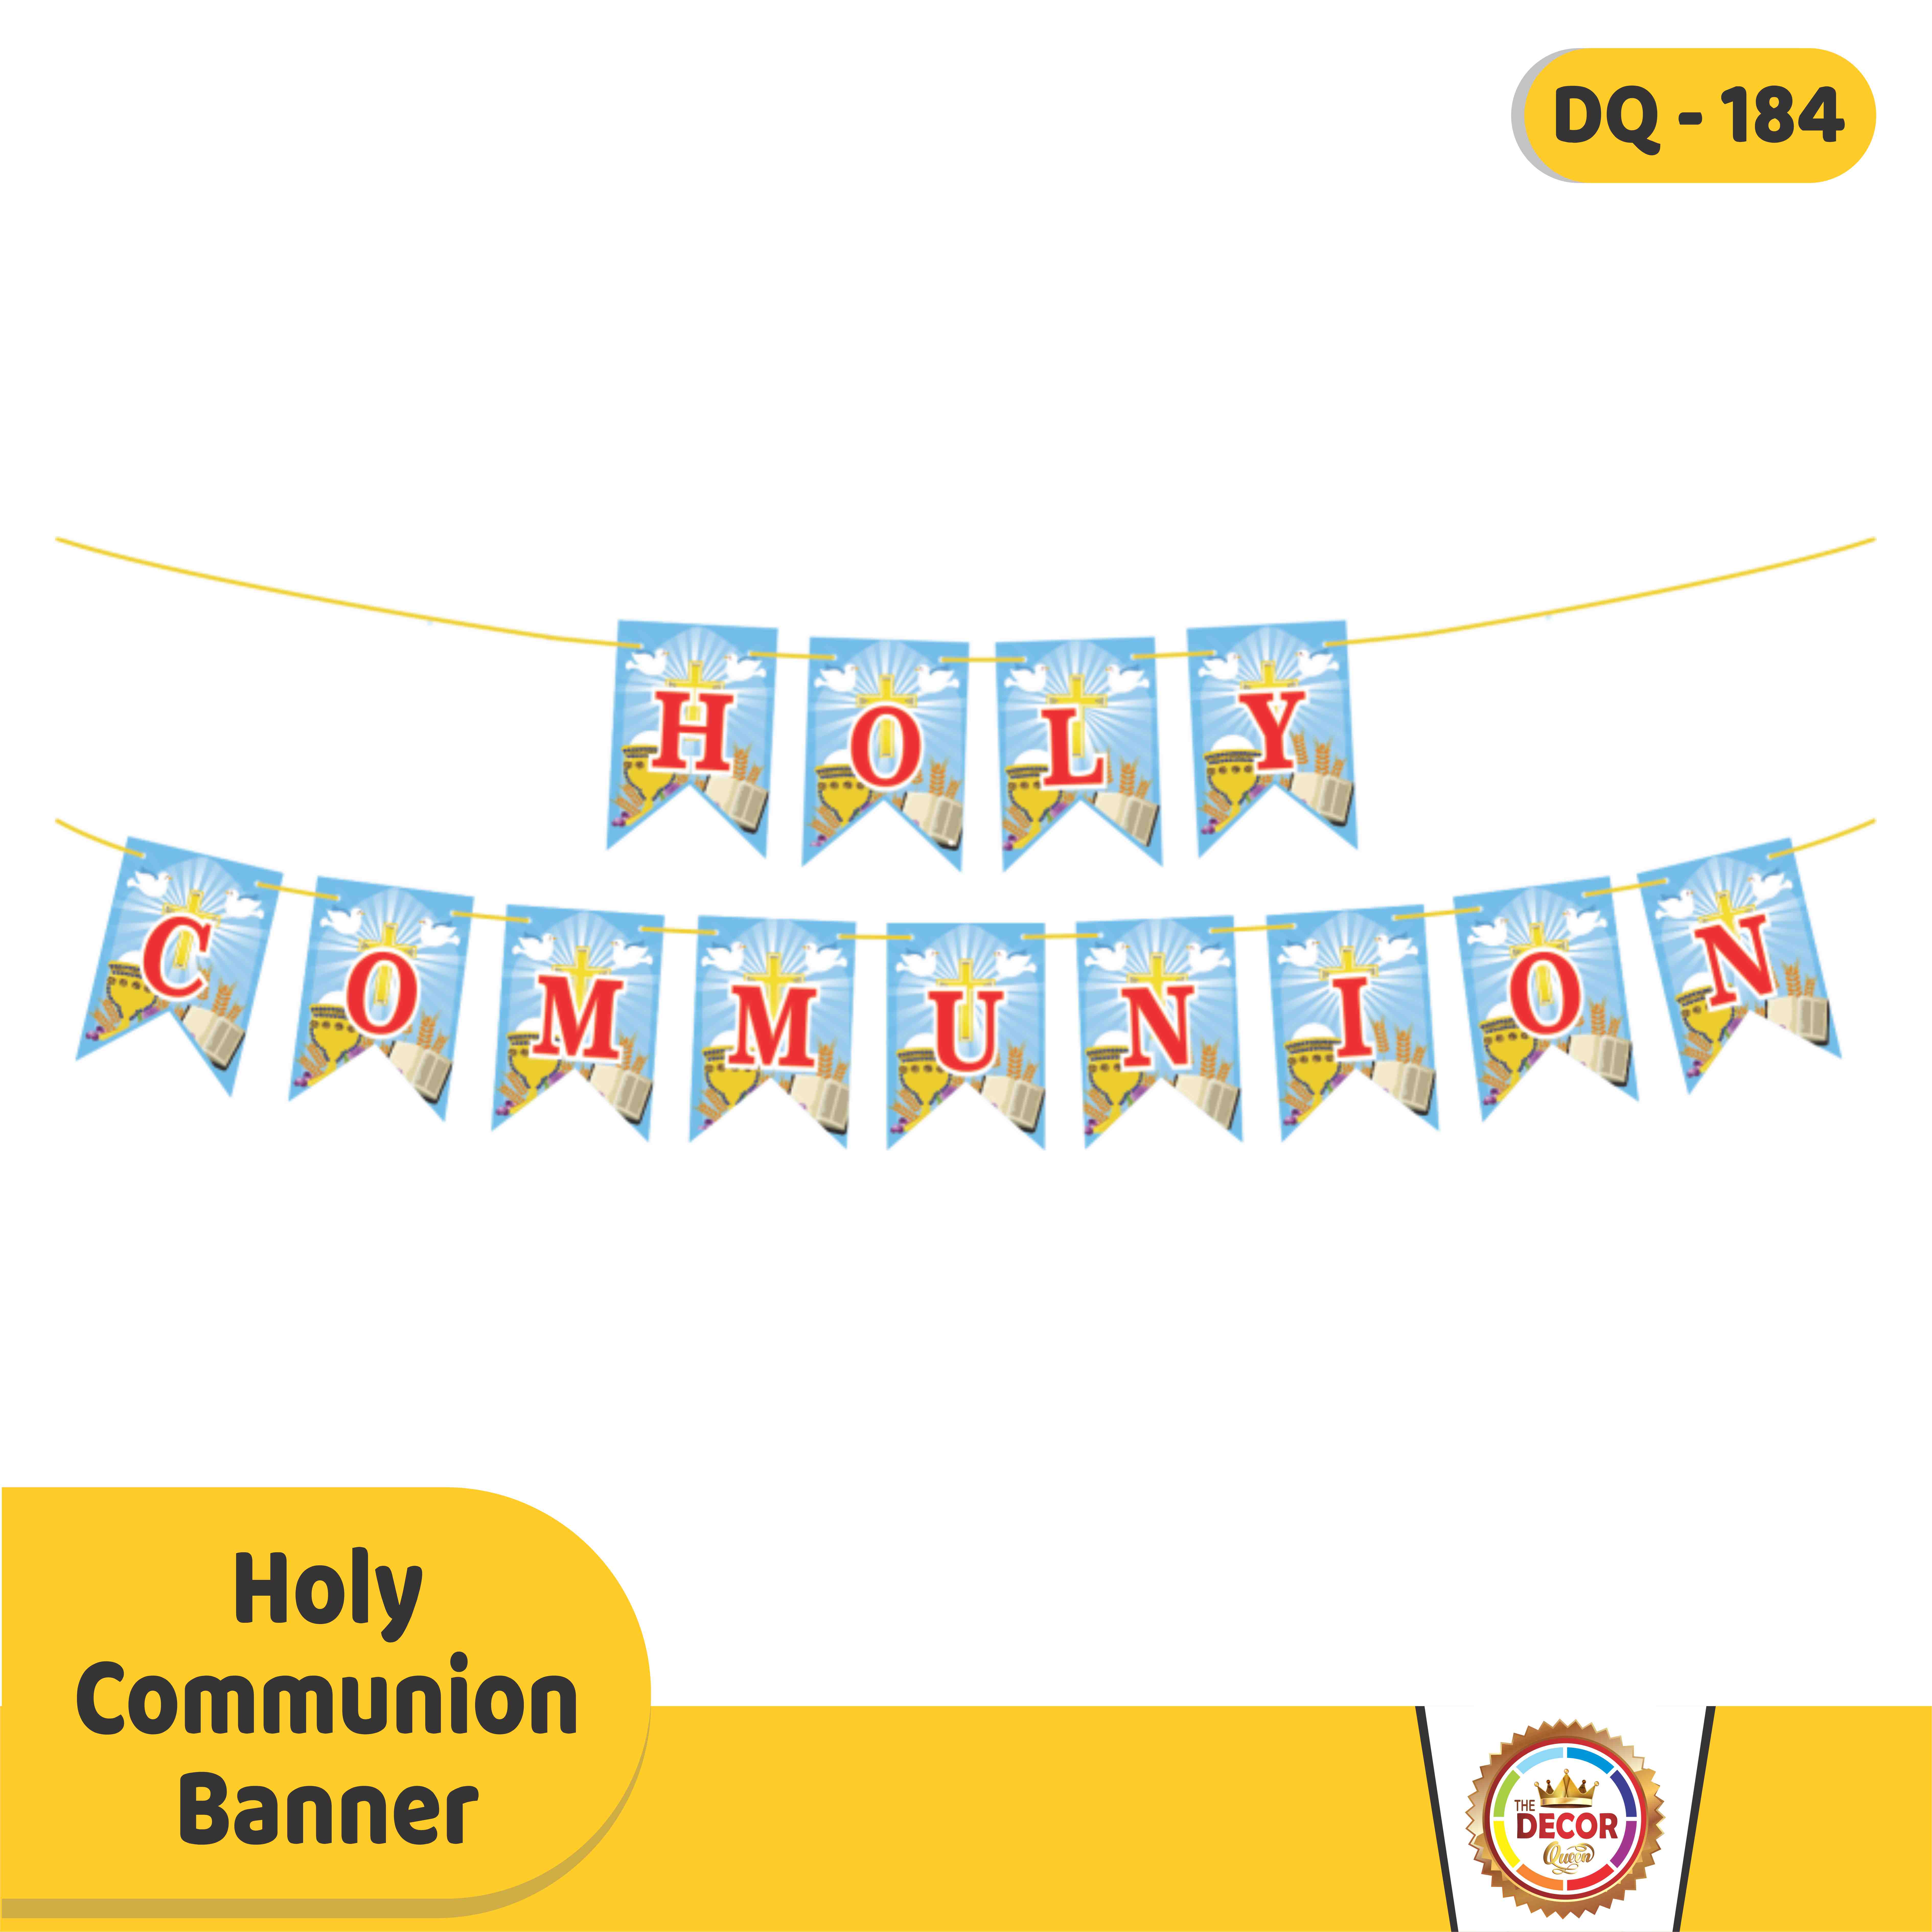 HOLY COMMUNION BANNER|Banners|Other Banners